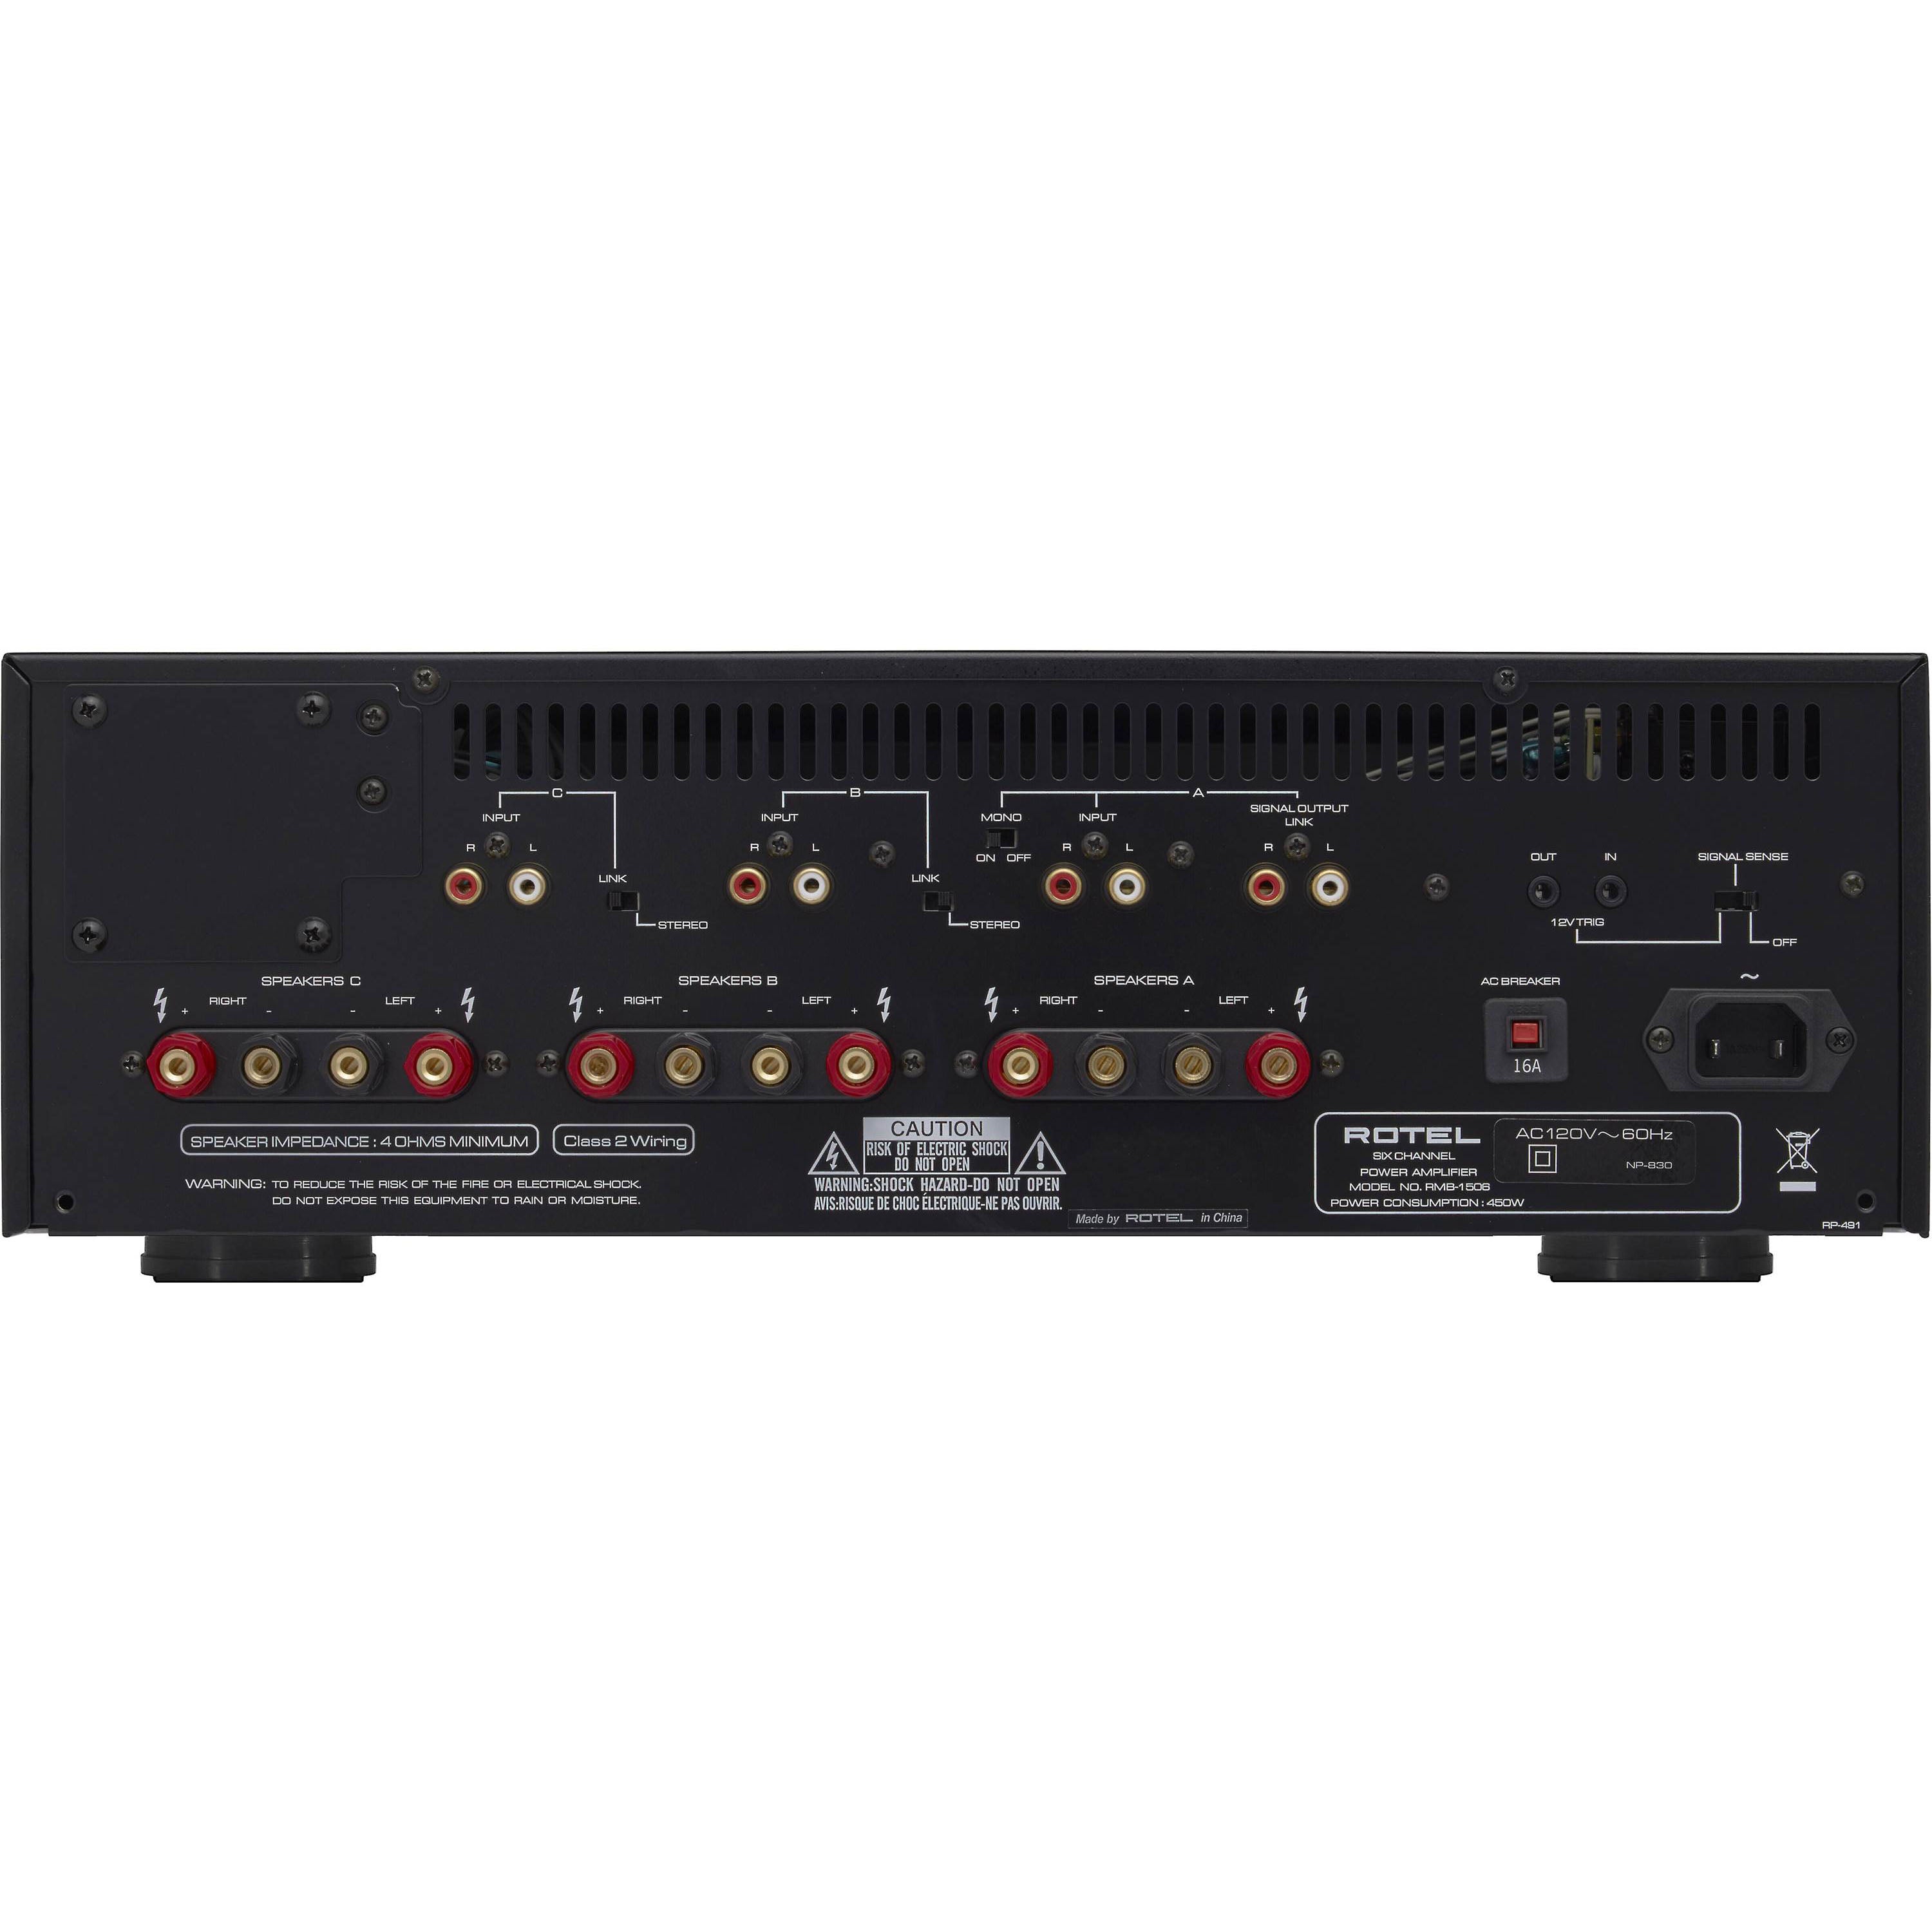 Rotel RMB-1506 6-Channel Distribution Amplifier (black)